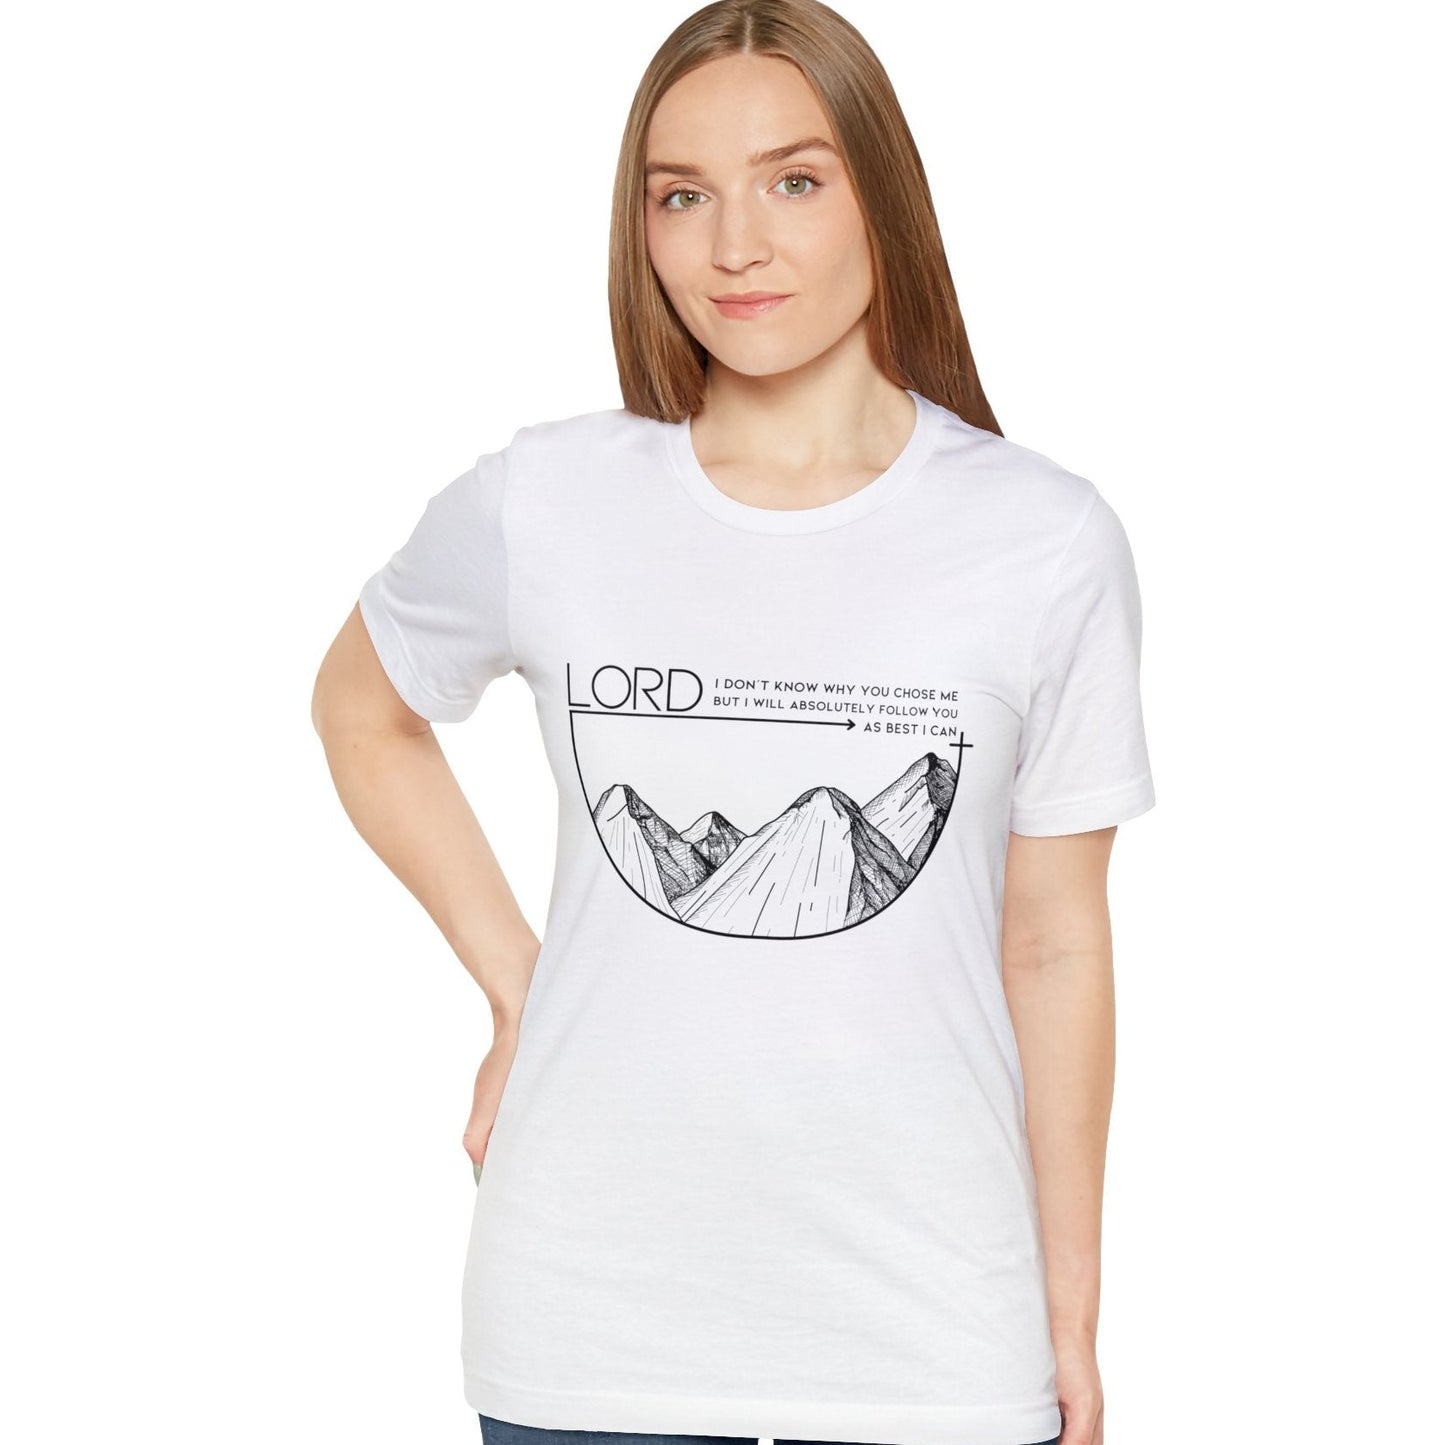 Follow the Lord, Express Delivery, Christian T-shirt for Men and Women white